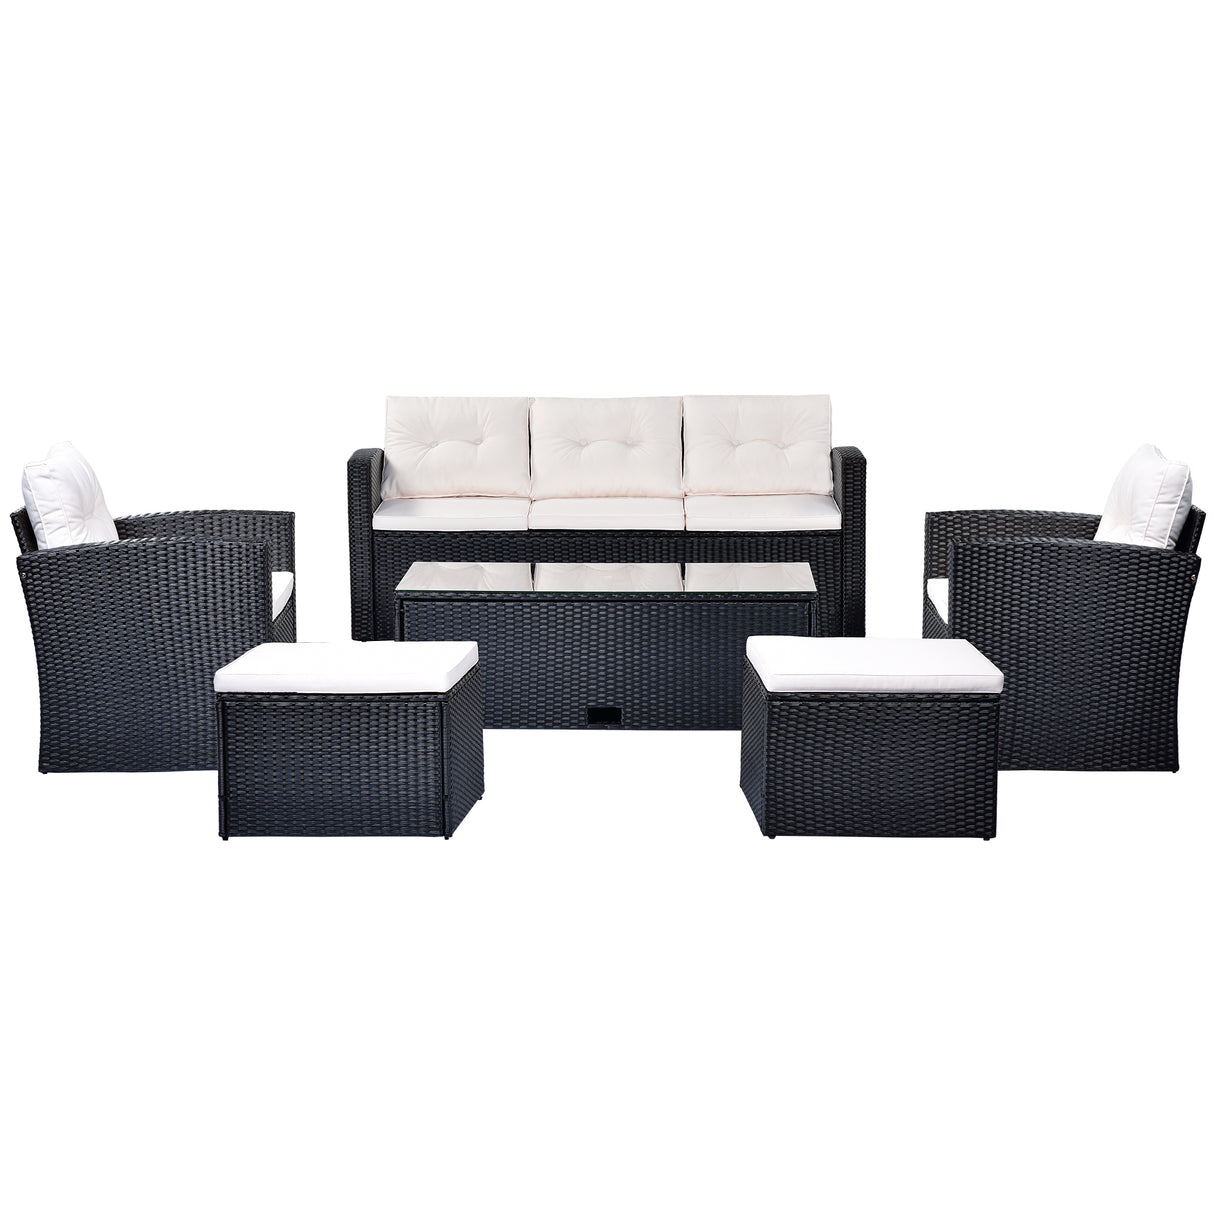 GO 6-piece All-Weather Wicker PE rattan Patio Outdoor Dining Conversation Sectional Set with coffee table, wicker sofas, ottomans, removable cushions (Black wicker, Beige cushion) - Home Elegance USA